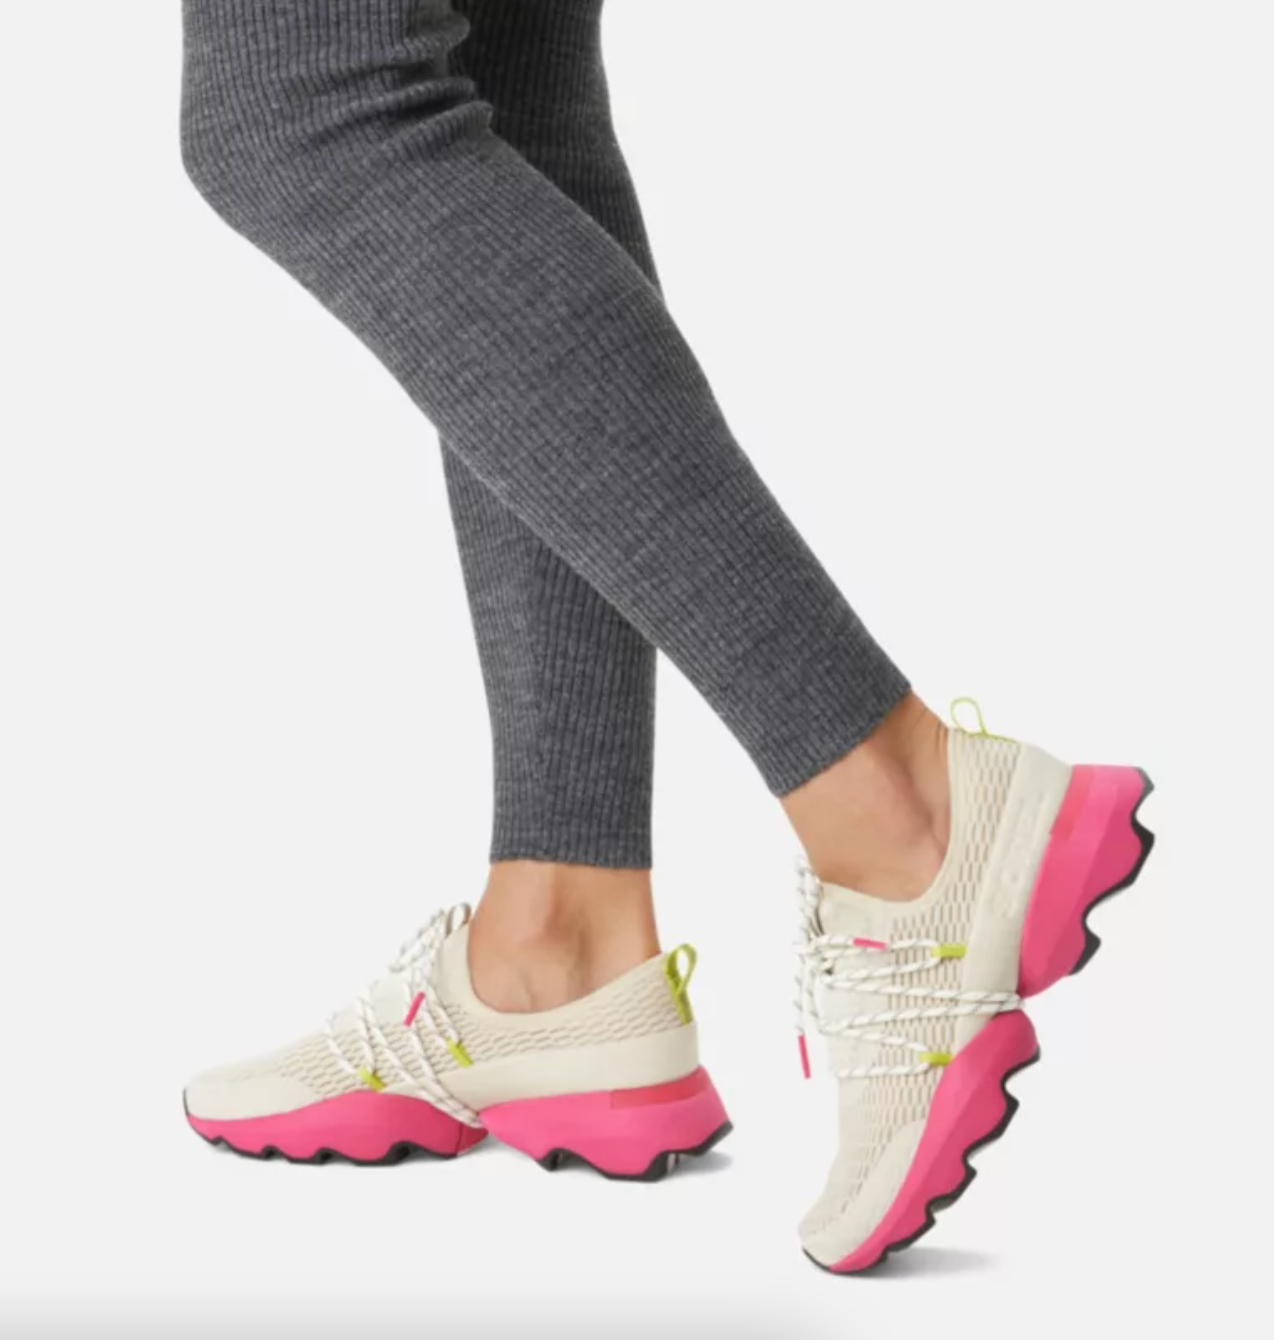 20 Pairs Of Comfy Shoes You Can Walk 10,000+ Steps In